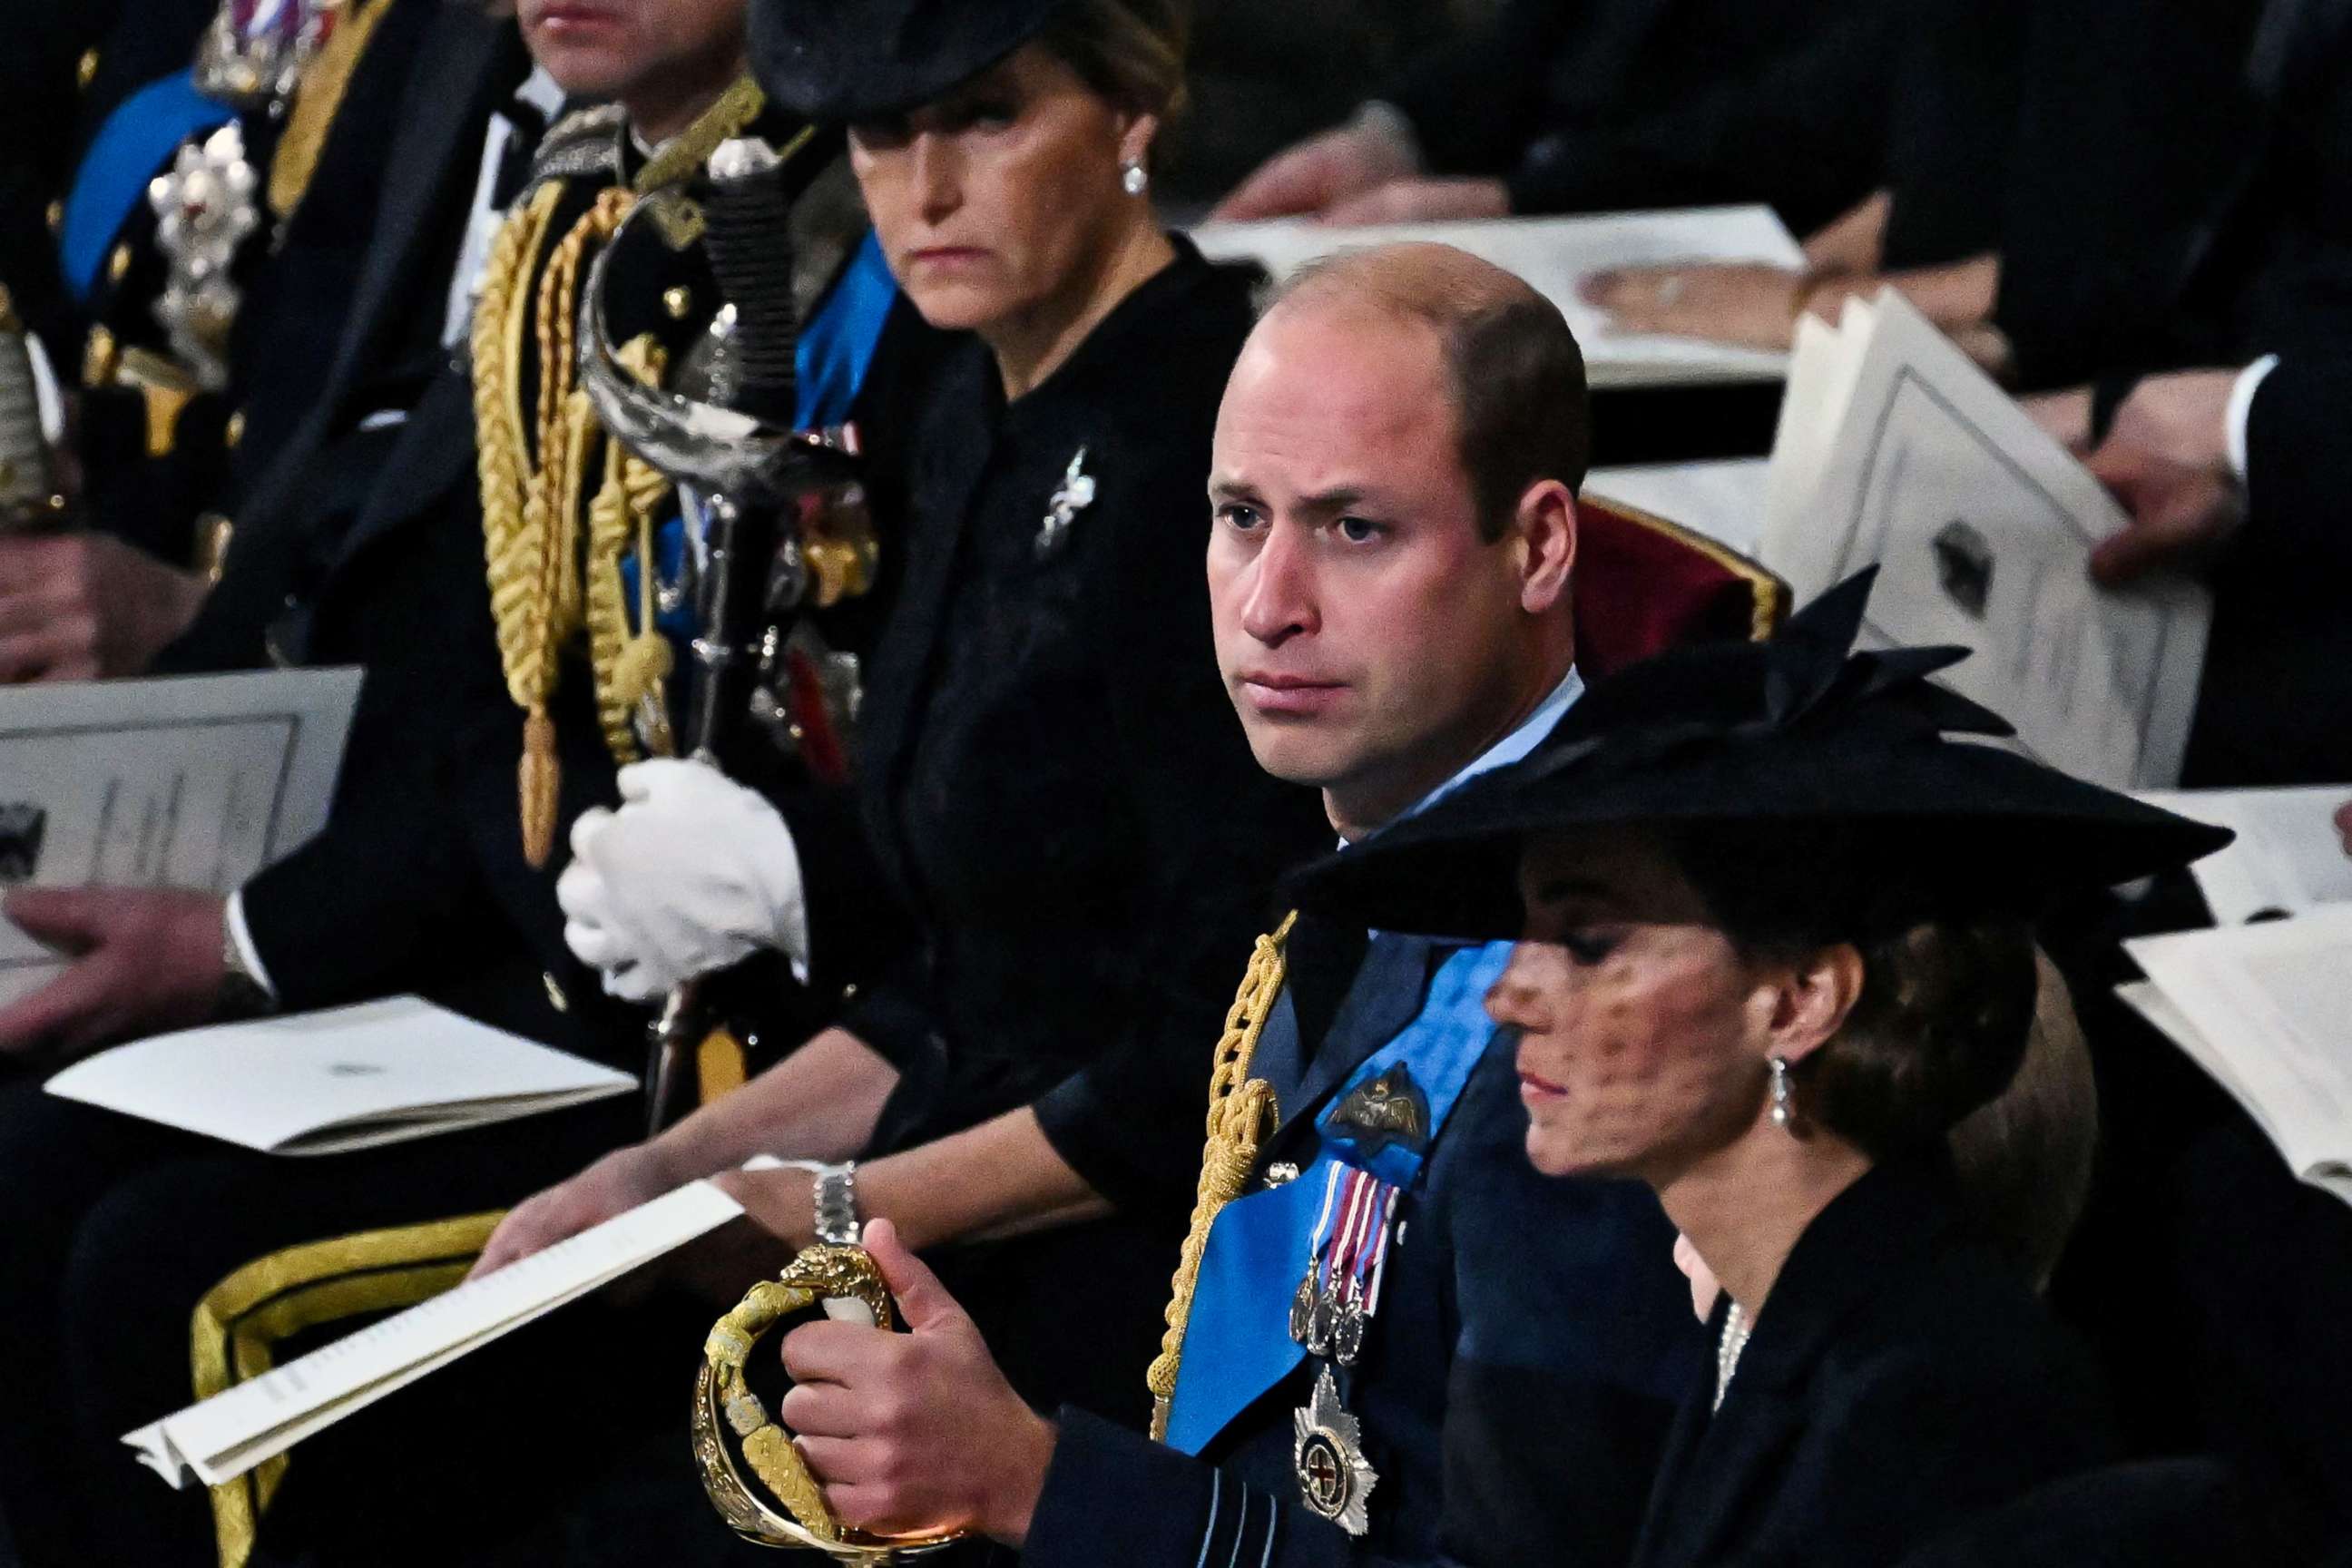 PHOTO: Prince William, Prince of Wales attends with Catherine, Princess of Wales and Britain's Sophie, Countess of Wessex the State Funeral Service for Britain's Queen Elizabeth II, at Westminster Abbey in London on Sept. 19, 2022.